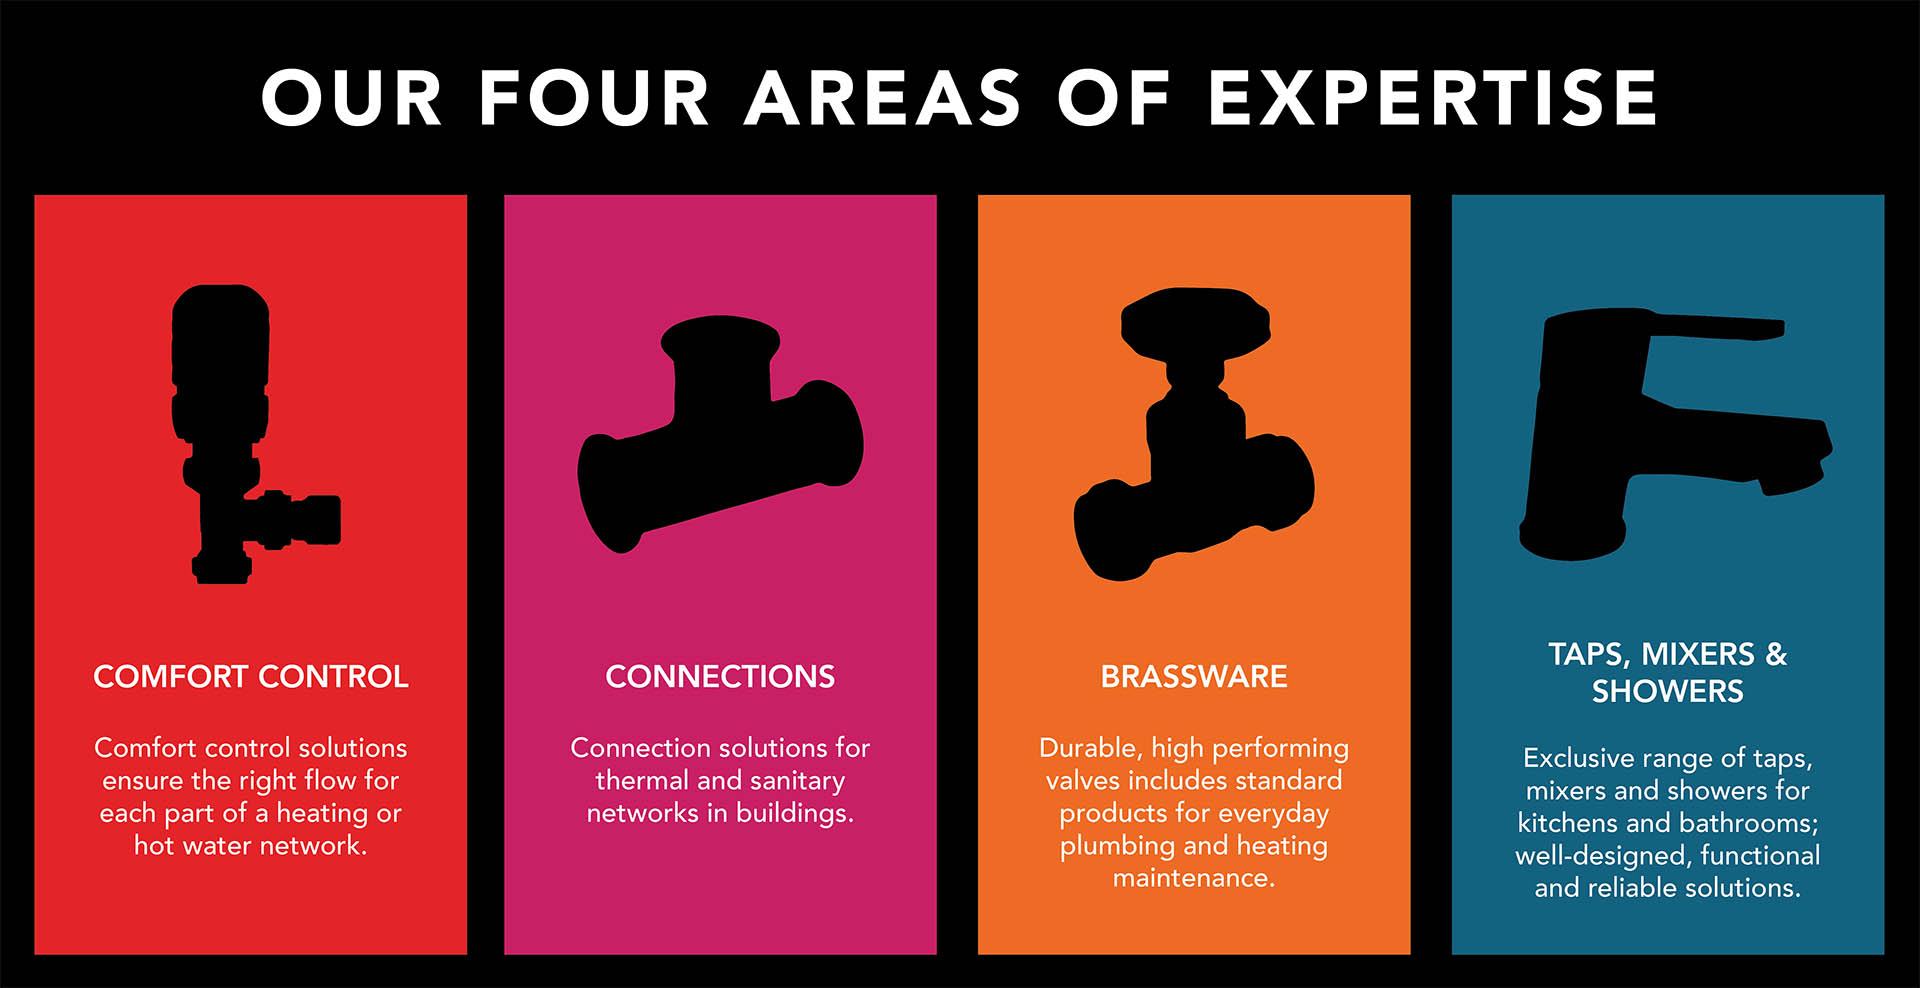 Our 4 areas of expertise